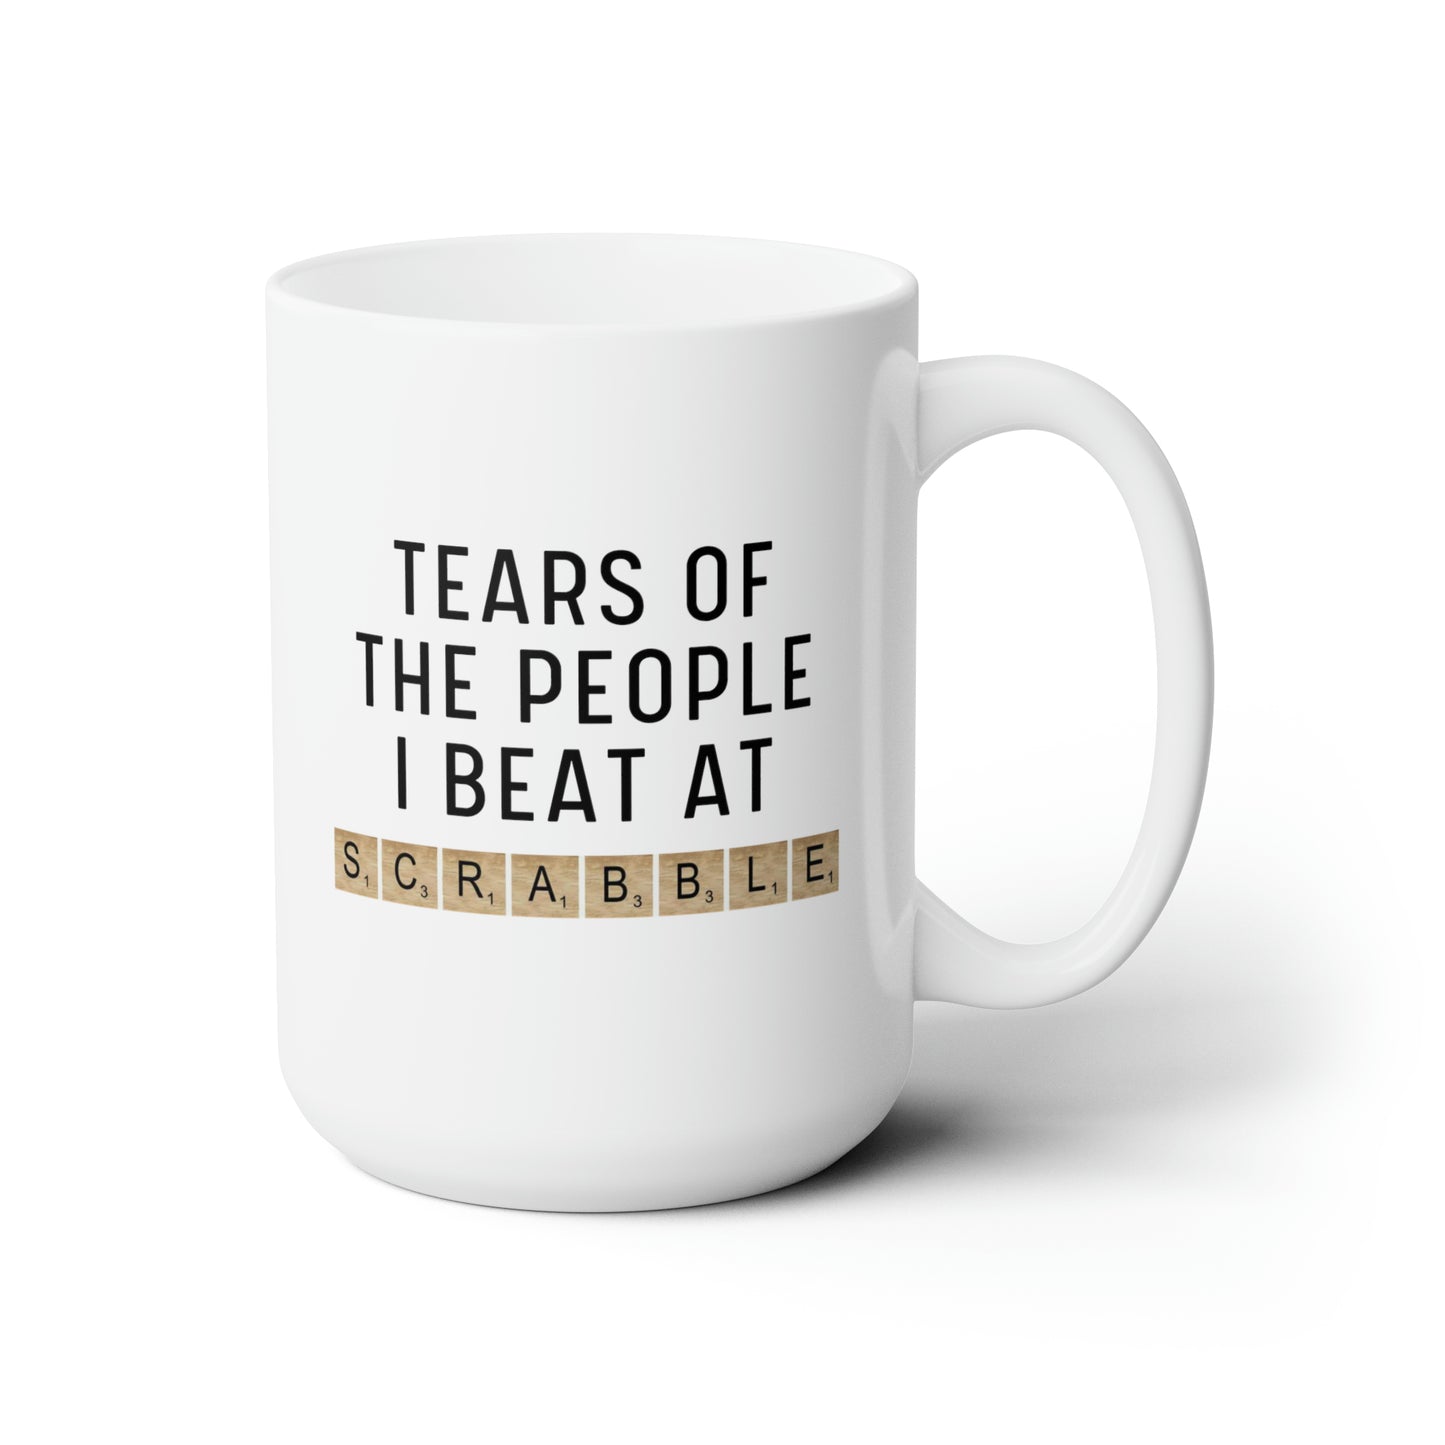 Tears of the People I Beat at Scrabble 15oz white Funny large Coffee Mug Player Gift Board Game Tiles Lover Gift waveywares wavey wares wavywares wavy wares